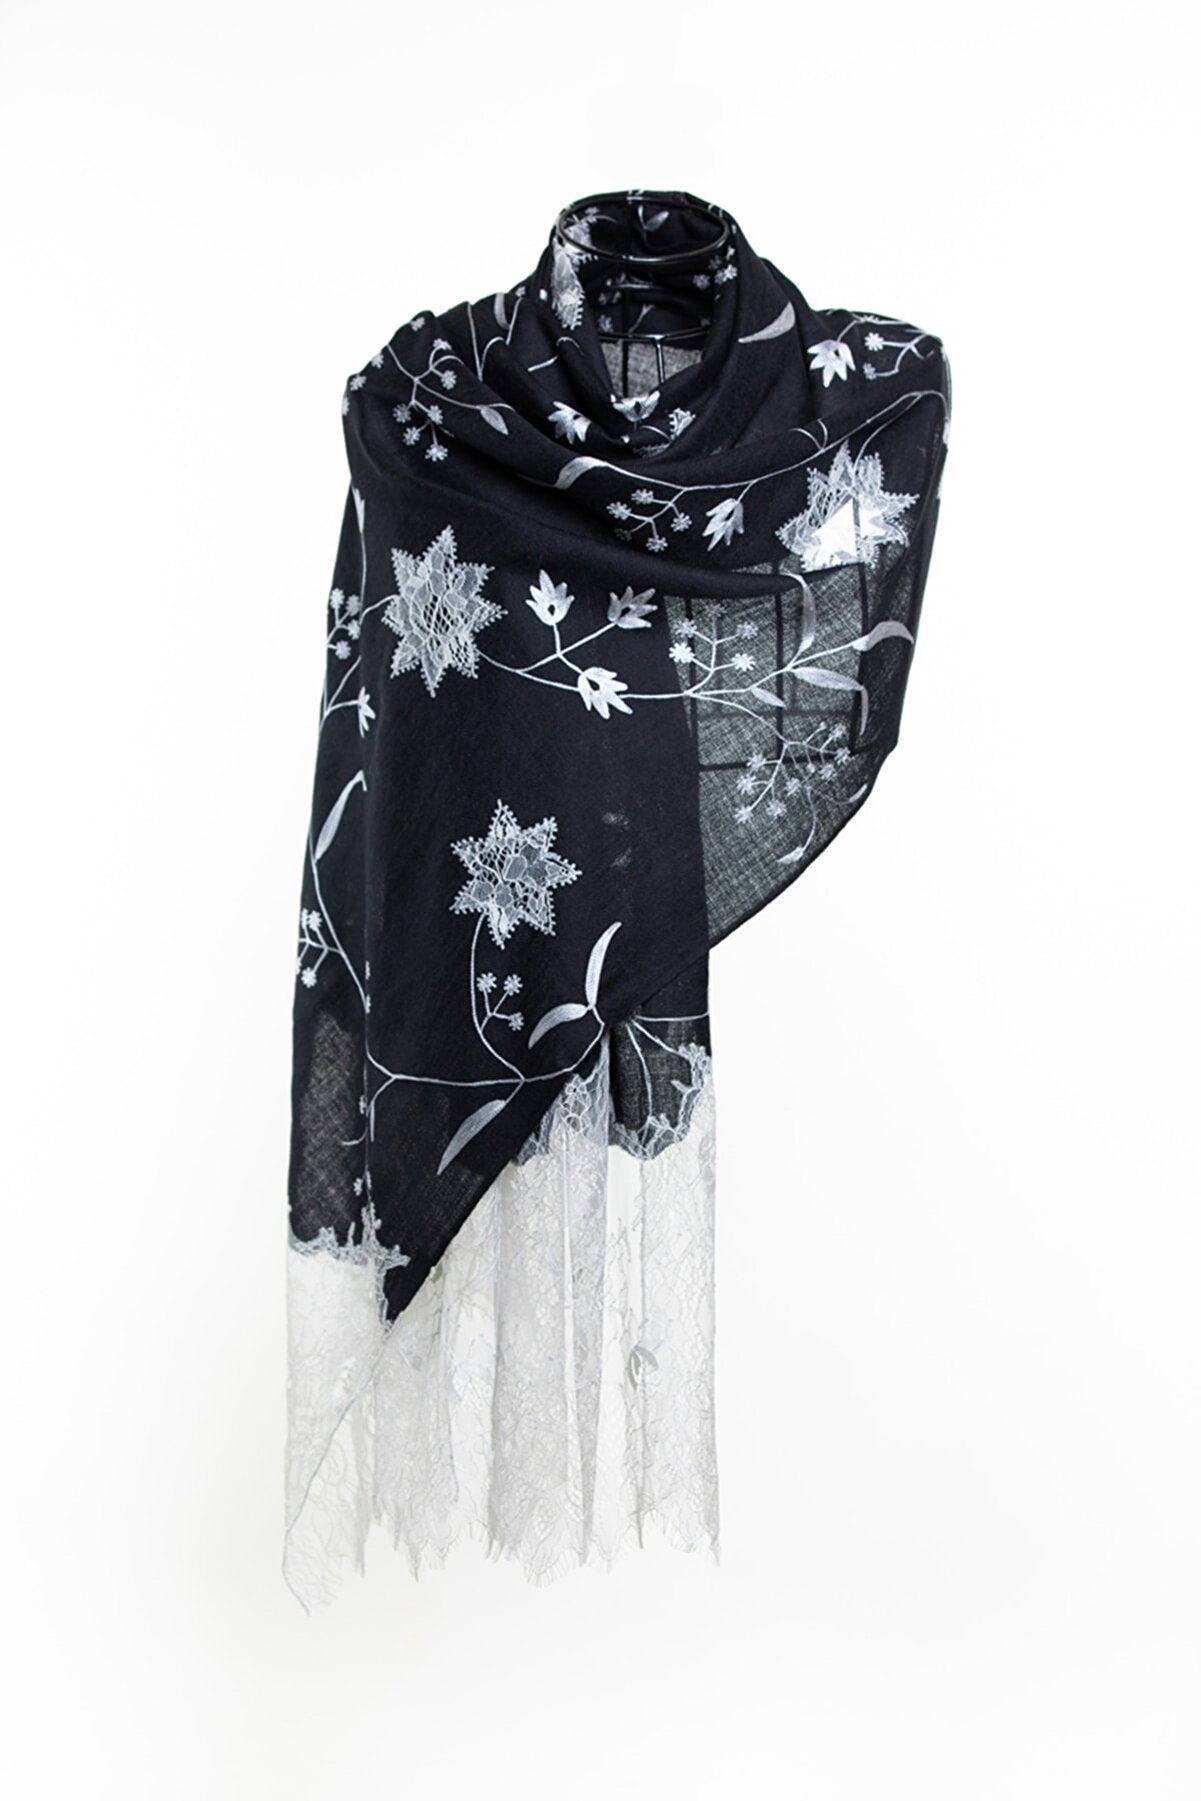 Border Lace & Embroidery Floral Sheer Shawl - Black & White